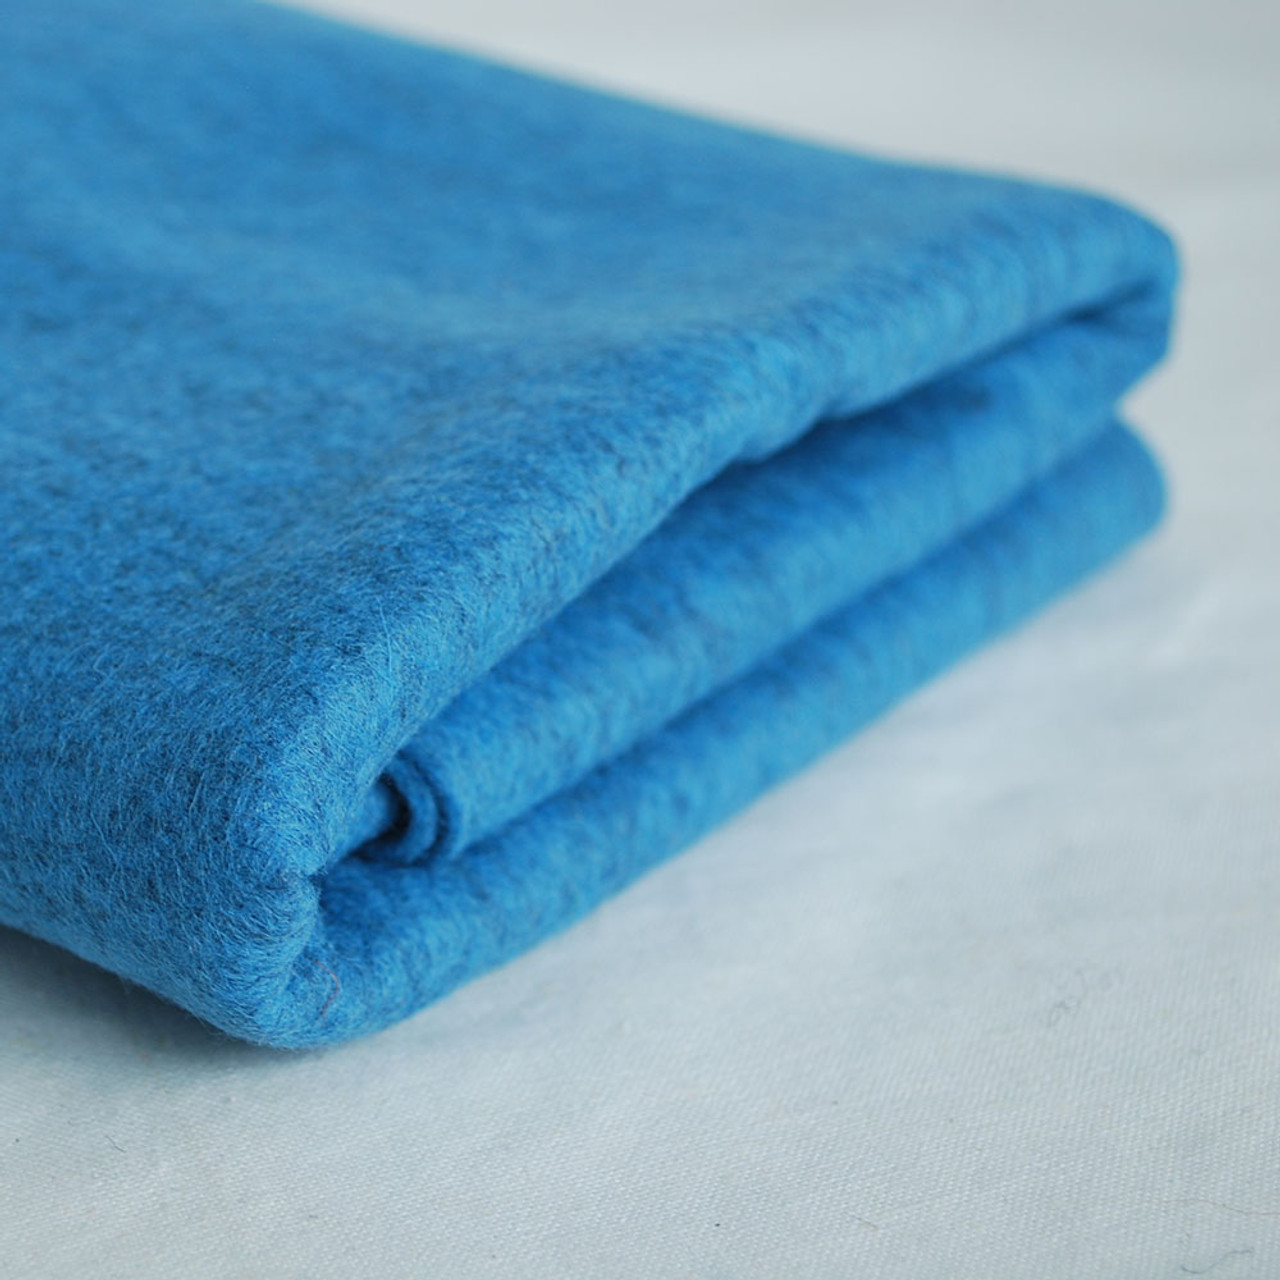 100% Wool Felt Fabric - 1mm Thick - Made in Western Europe - 1 Metre x 180cm